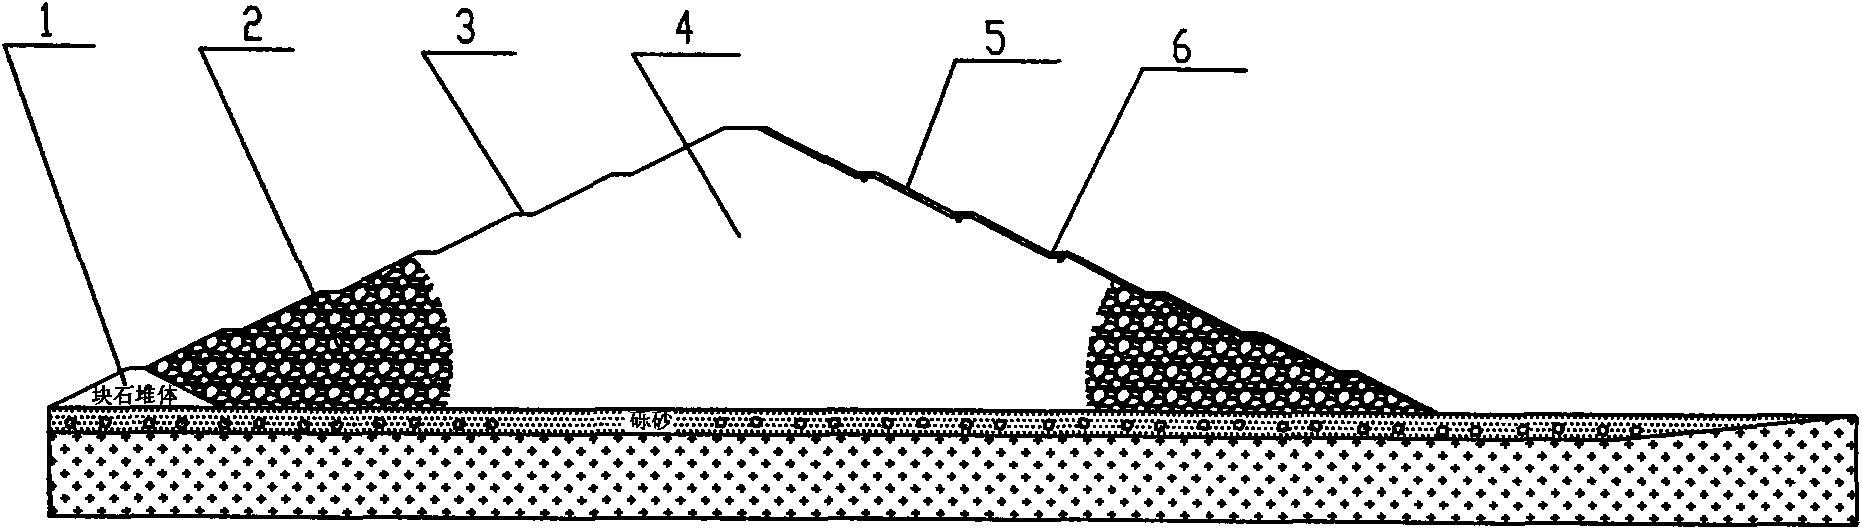 Method for building high roller compaction water-permeable tailing dam by rock dumping